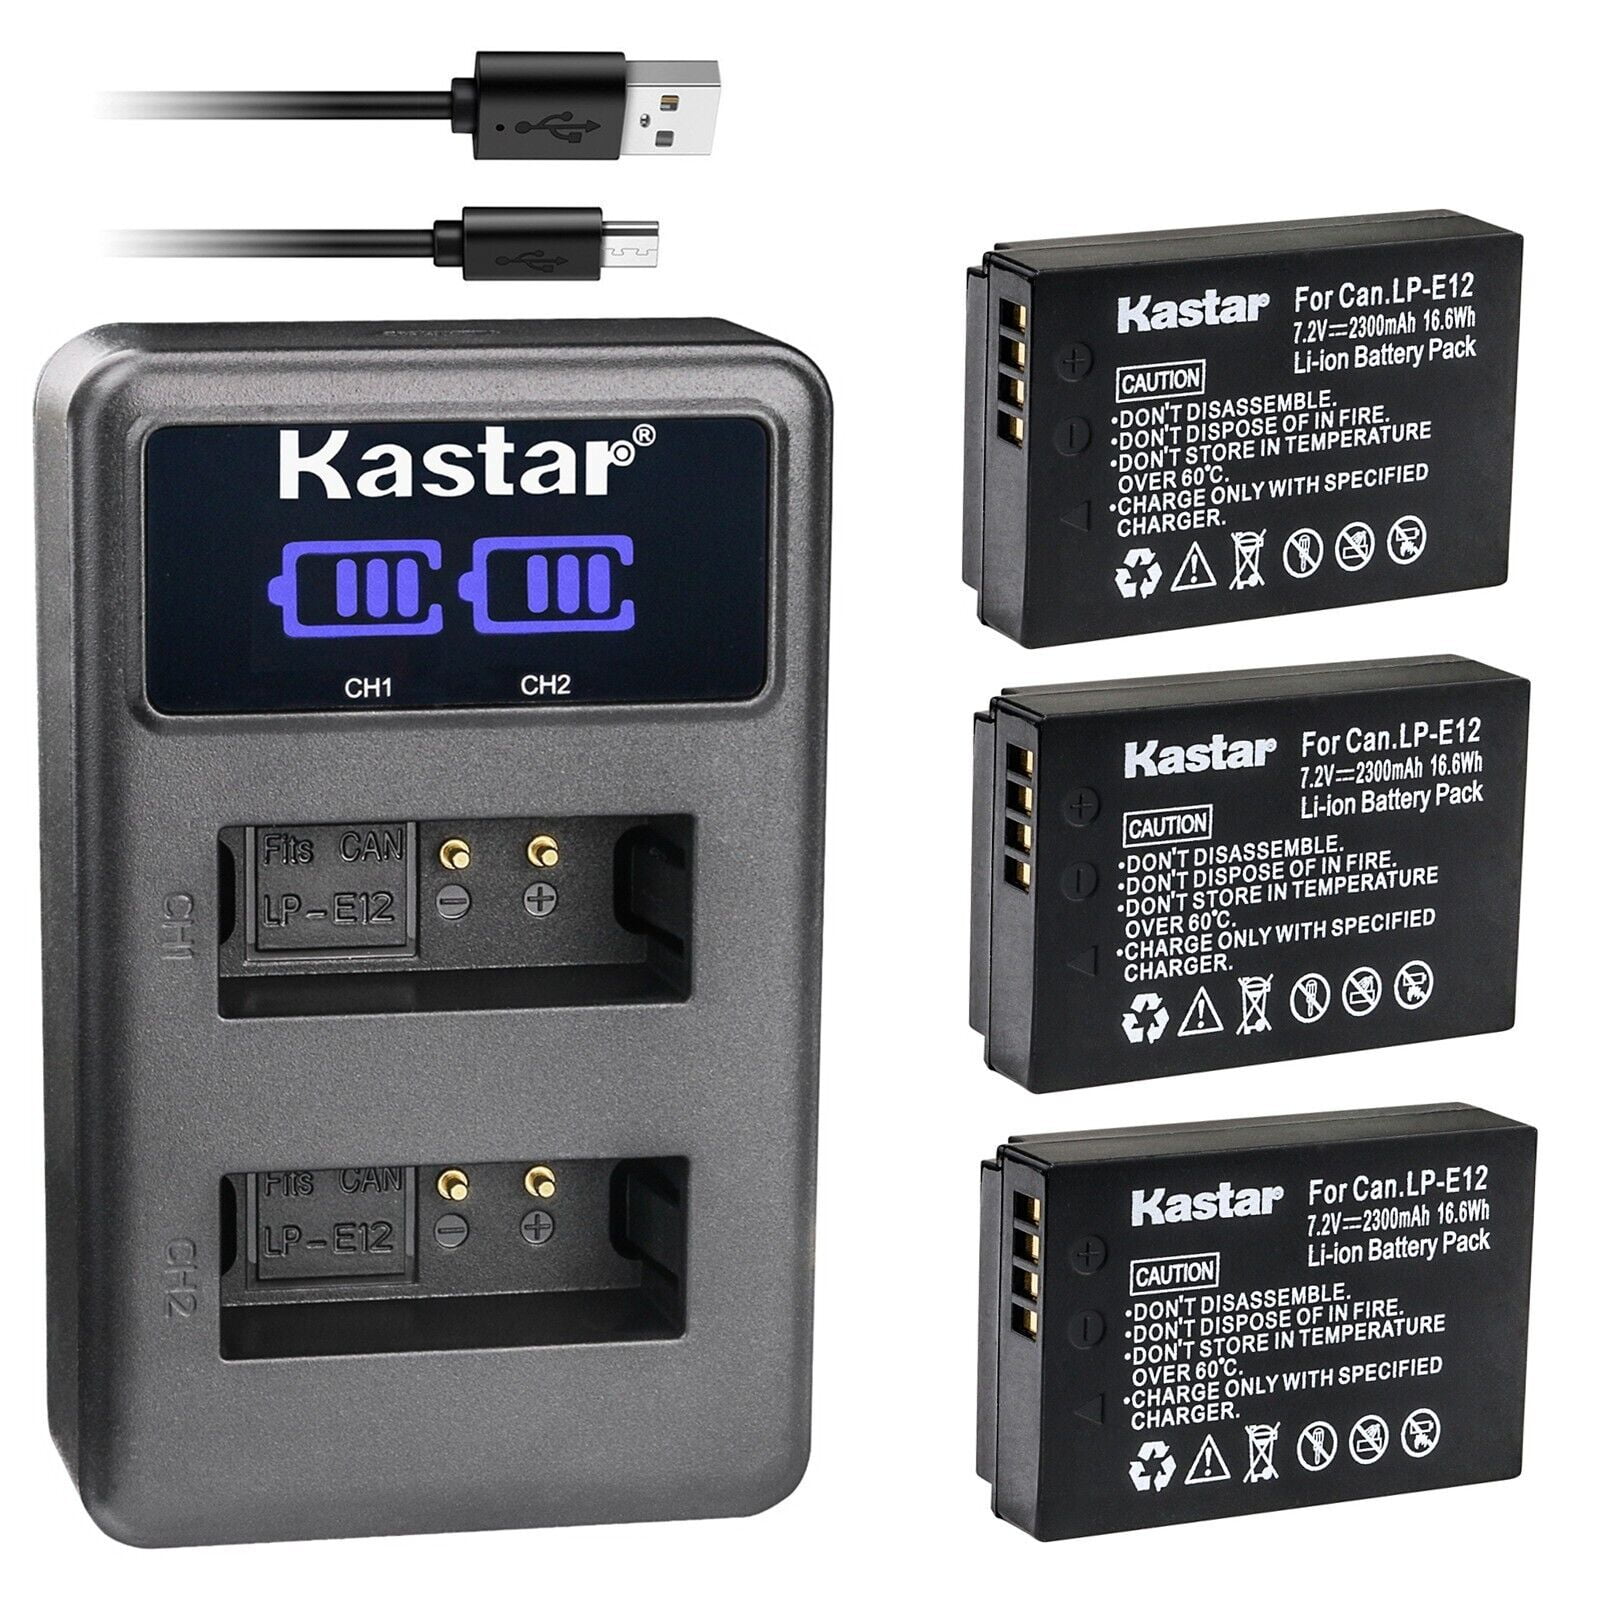 werkwoord noodsituatie Blauwdruk Kastar 3-Pack LP-E12Battery and LED2 USB Charger Compatible with Canon EOS  100D, EOS M, EOS M2, EOS M10, EOS M50, EOS M50 Mark II, EOS M100, EOS M200,  EOS Rebel SL1, PowerShot